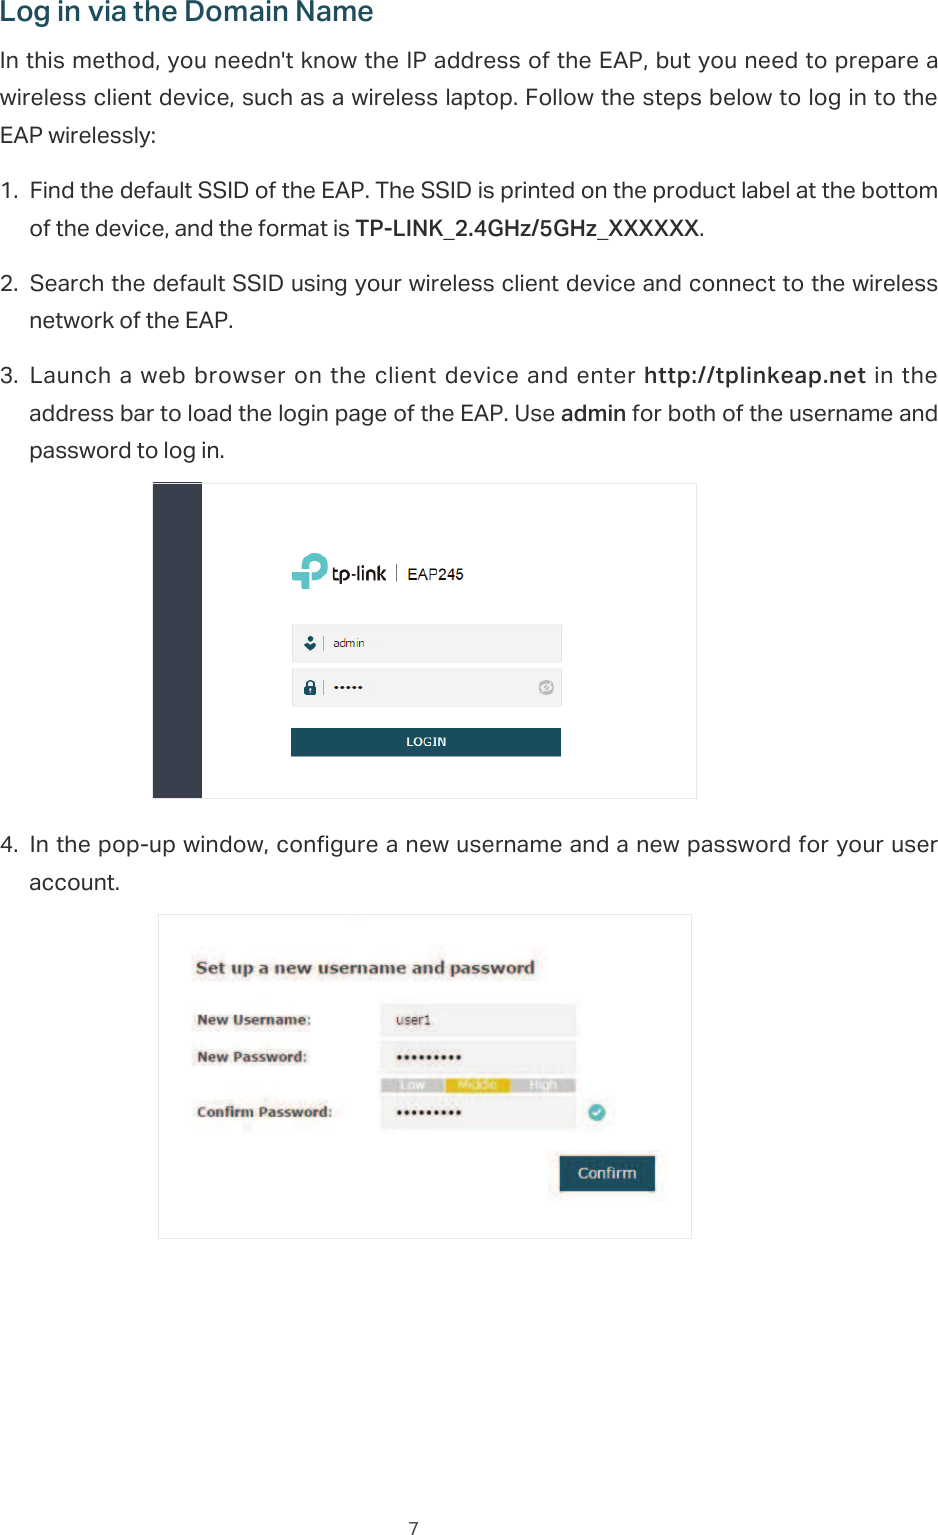  7/RJLQYLDWKH&apos;RPDLQ1DPHIn this method, you needn&apos;t know the IP address of the EAP, but you need to prepare a wireless client device, such as a wireless laptop. Follow the steps below to log in to the EAP wirelessly:̝Find the default SSID of the EAP. The SSID is printed on the product label at the bottom of the device, and the format is 73/,1.B*+]*+]B;;;;;;.̝Search the default SSID using your wireless client device and connect to the wireless network of the EAP.̝Launch a  web browser on the  client device and  enter  KWWSWSOLQNHDSQHW  in the address bar to load the login page of the EAP. Use DGPLQ for both of the username and password to log in.̝In the pop-up window, configure a new username and a new password for your user account.